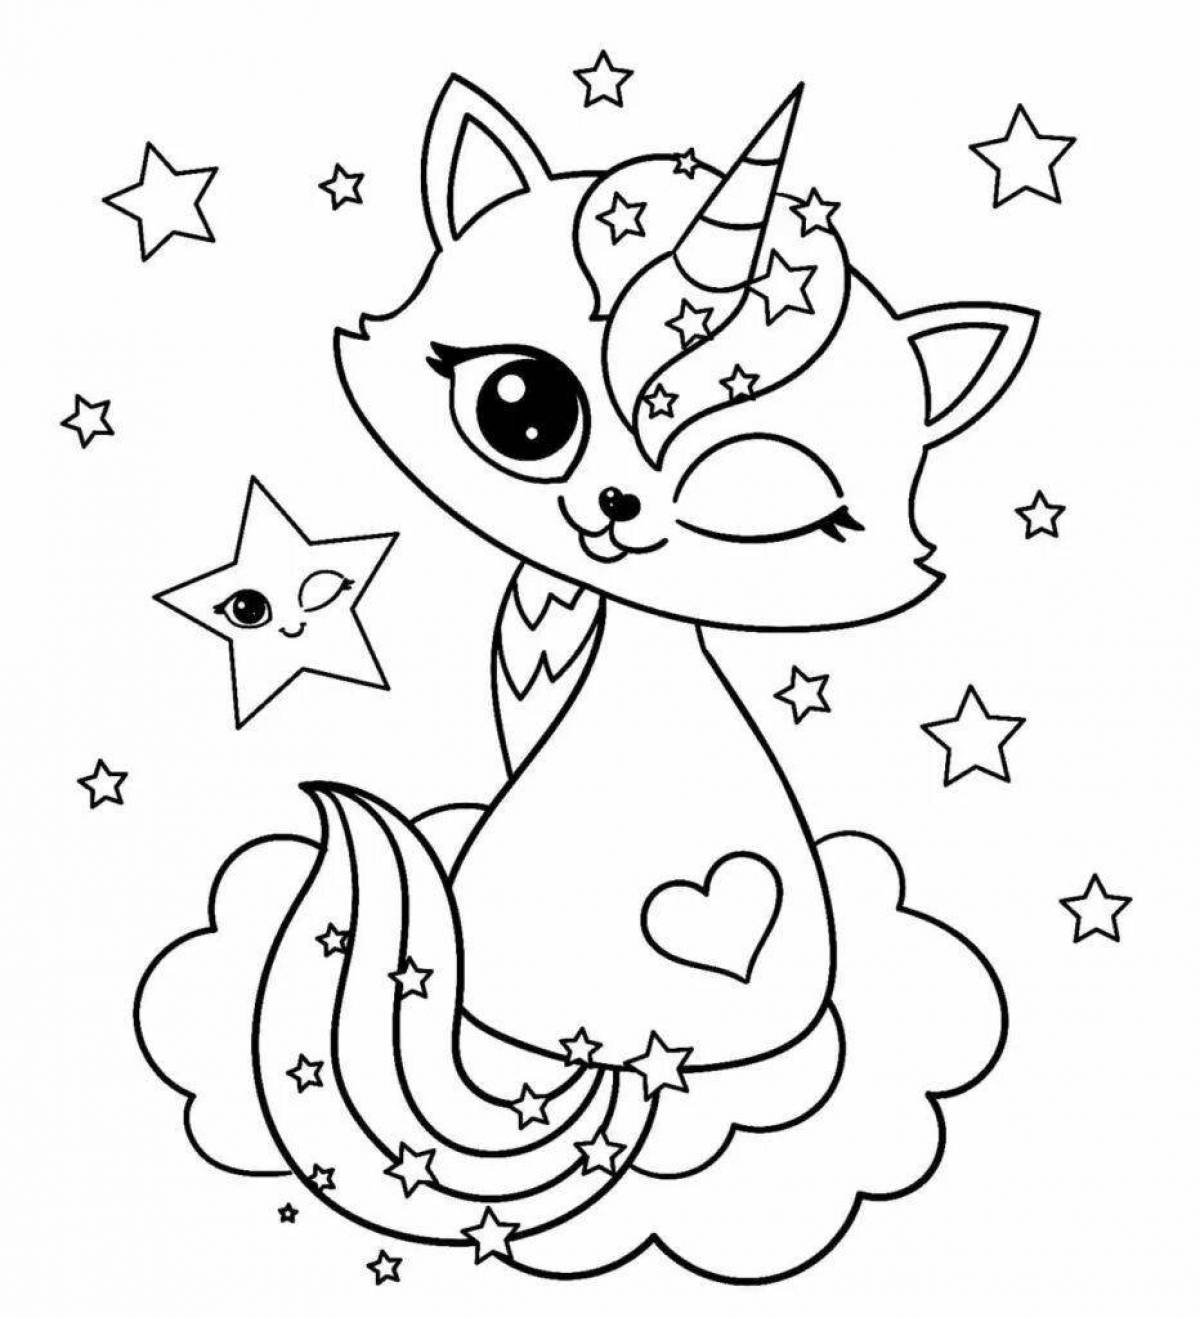 Great unicorn cat coloring book for kids